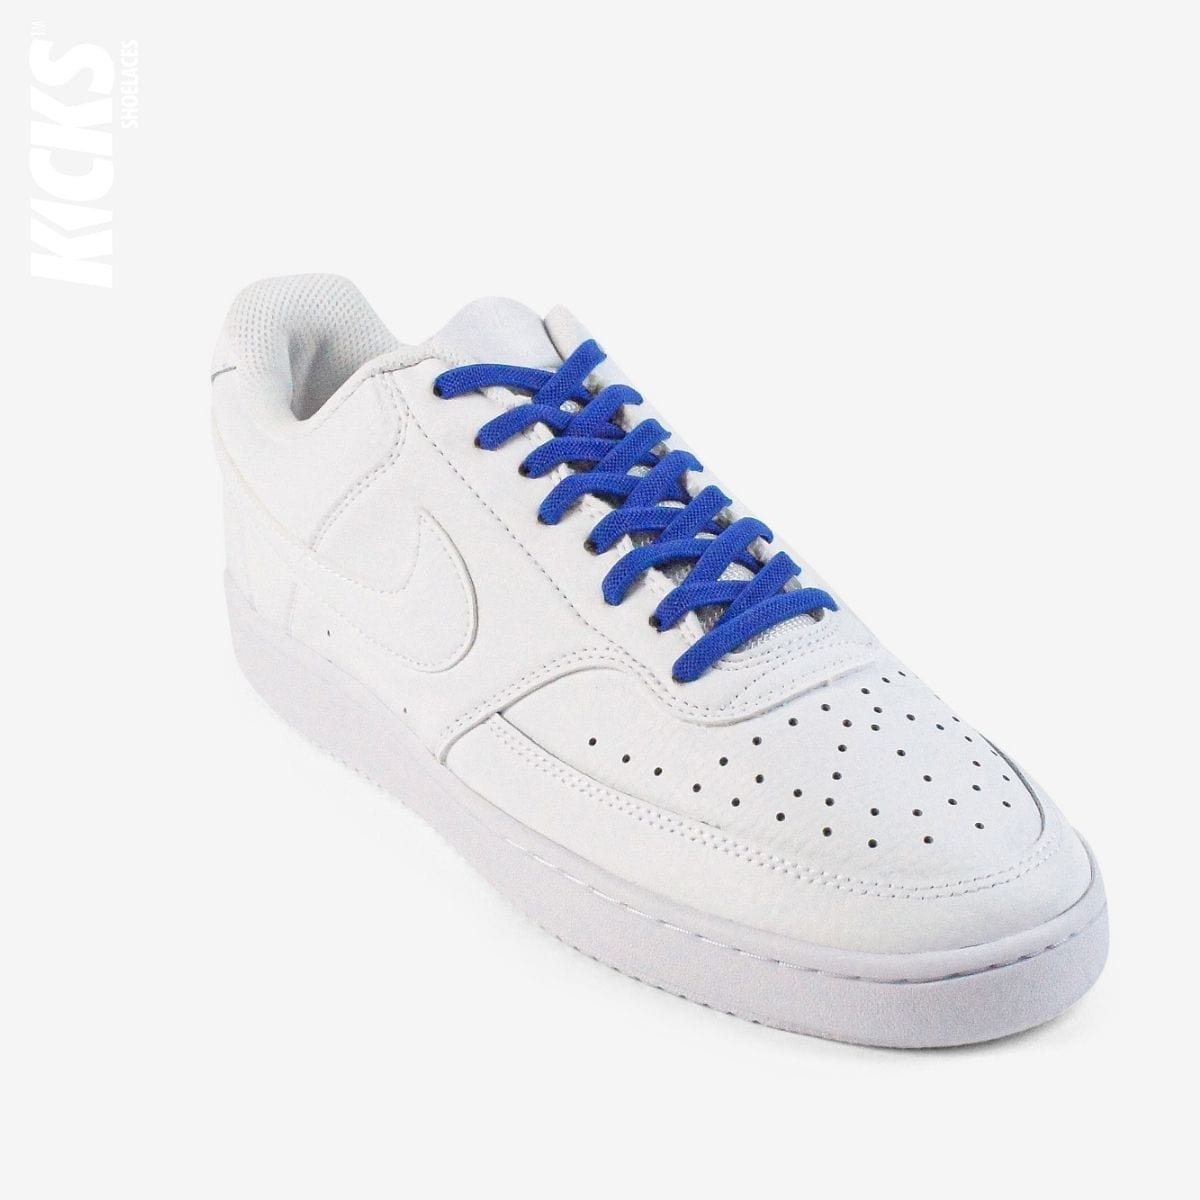 no-tie-shoelaces-with-royal-blue-laces-on-nike-white-sneakers-by-kicks-shoelaces